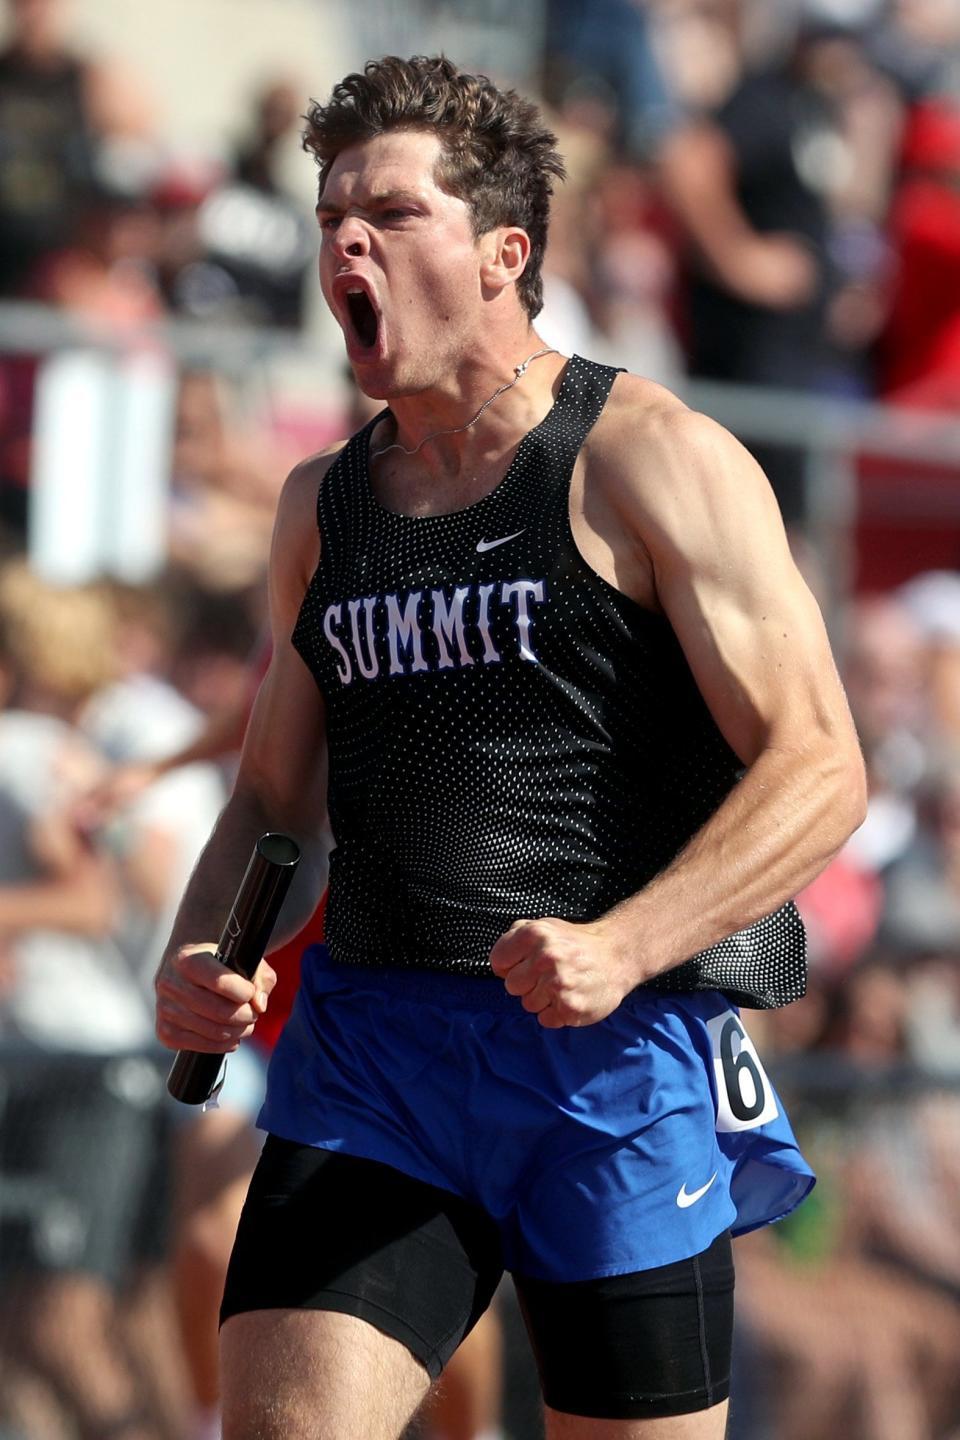 Summit Country Day's Matthew Shuler celebrates a first-place finish in the 4x200 meter relay during the OHSAA Division III State Track and Field Tournament on June 4 at Ohio State University's Jesse Owens Memorial Stadium in Columbus.